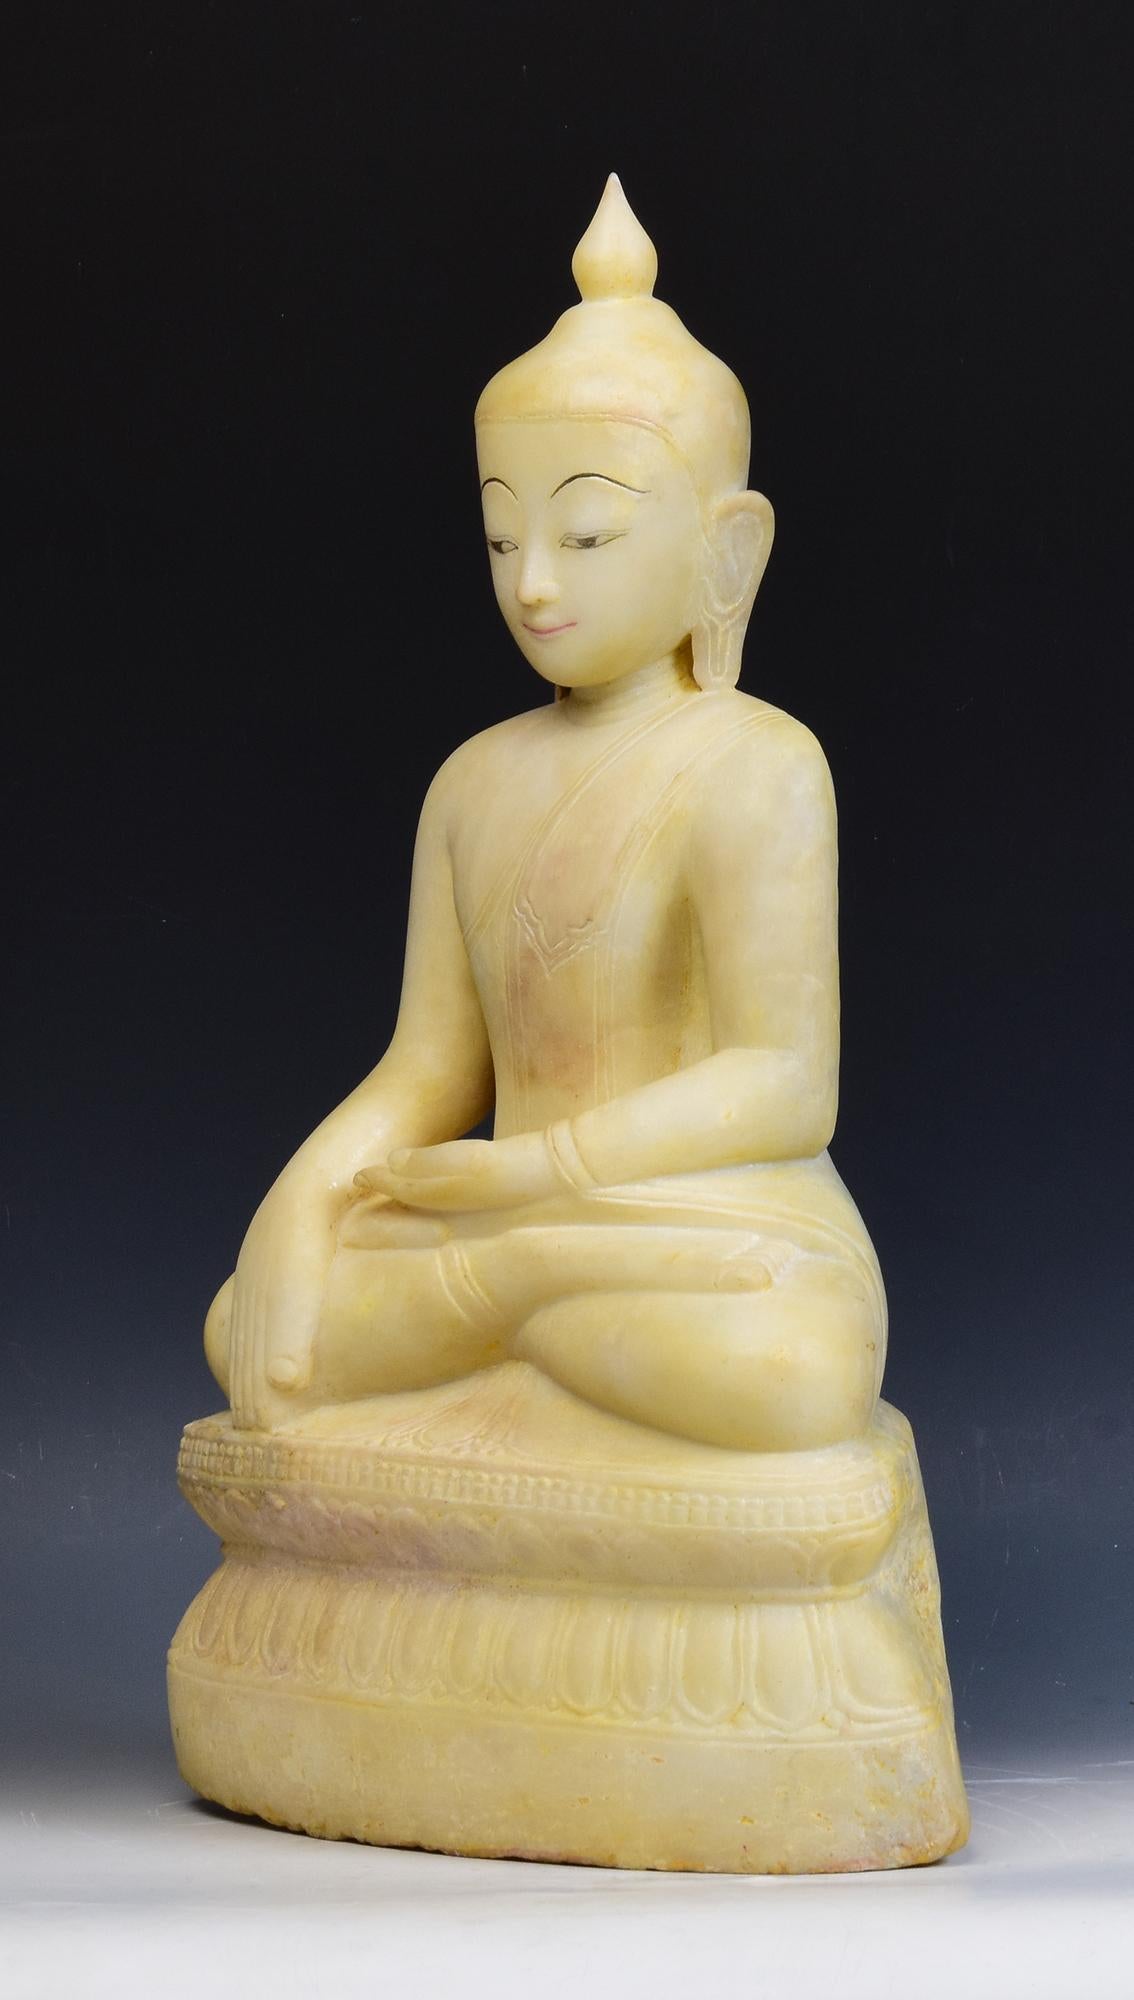 17th - 18th Century, Shan, Antique Burmese Alabaster Marble Seated Buddha Statue 3